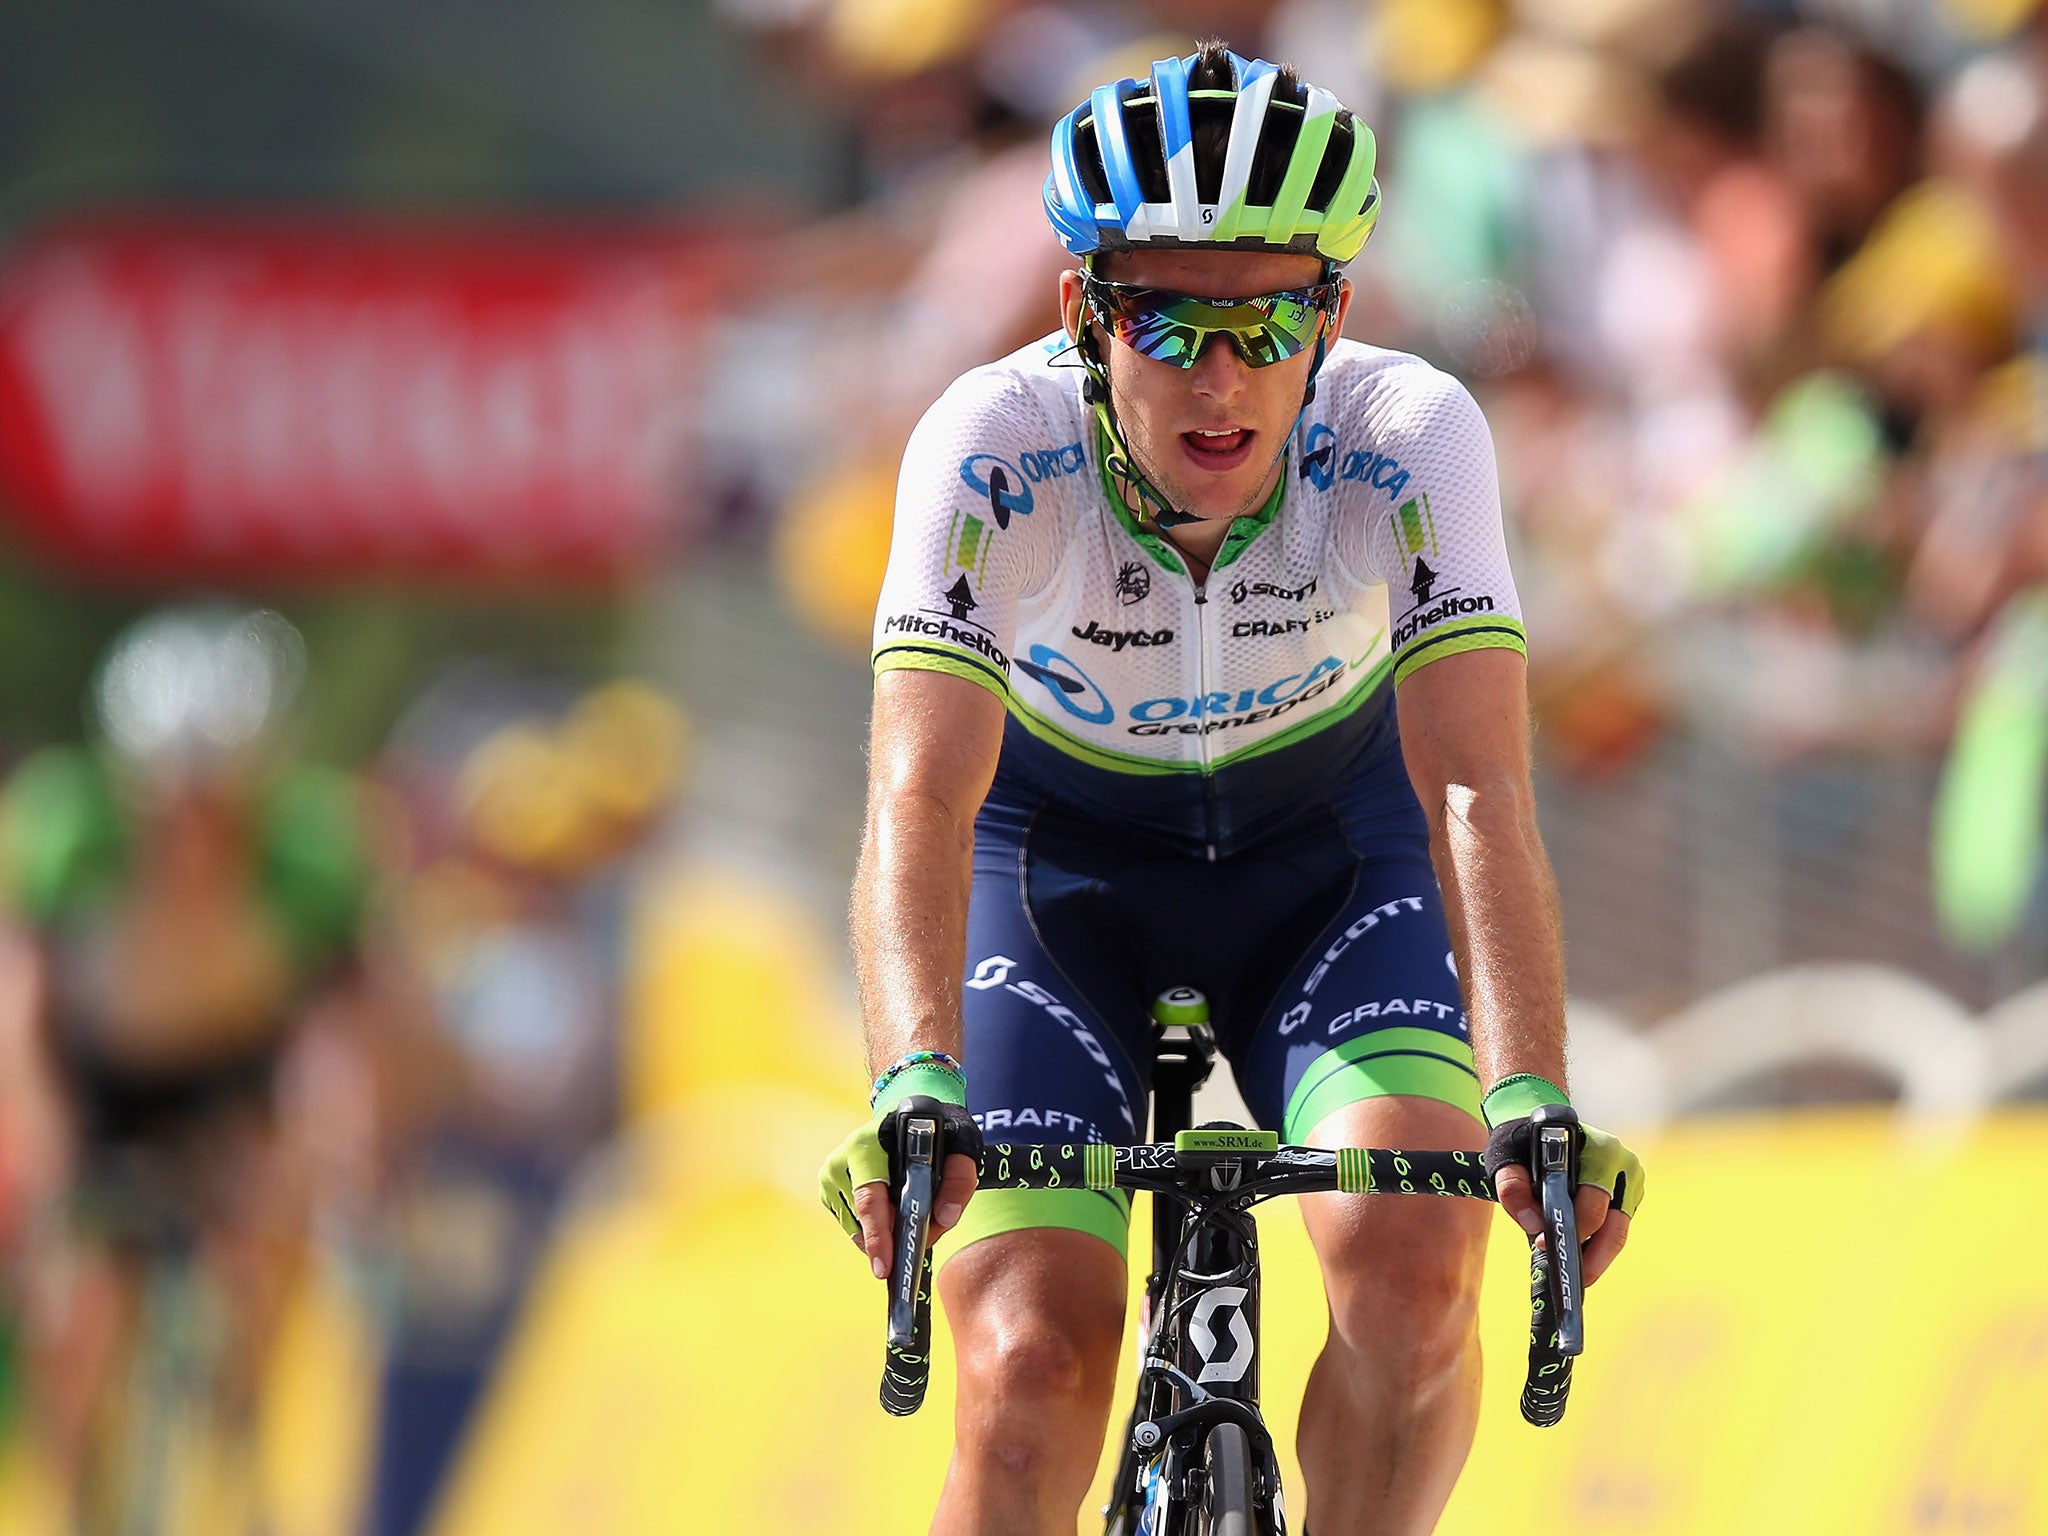 Simon Yates has pulled out of the Tour de France after an impressive debut ride